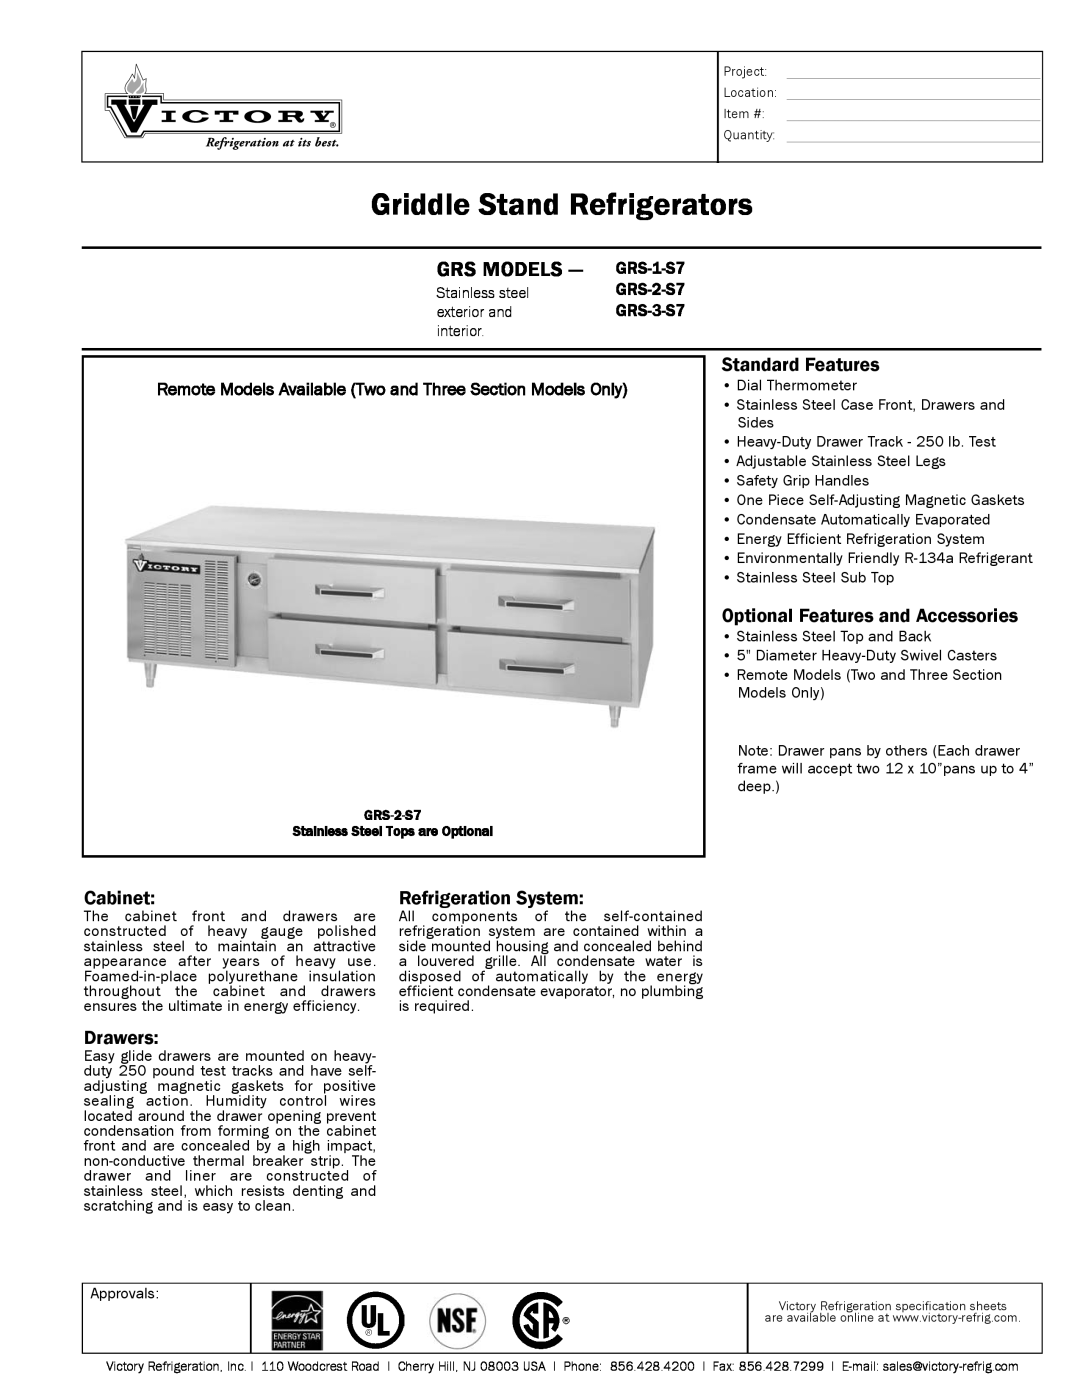 Victory Refrigeration GRS-2-S7 specifications Griddle Stand Refrigerators, Grs Models, Standard Features, Cabinet, Drawers 